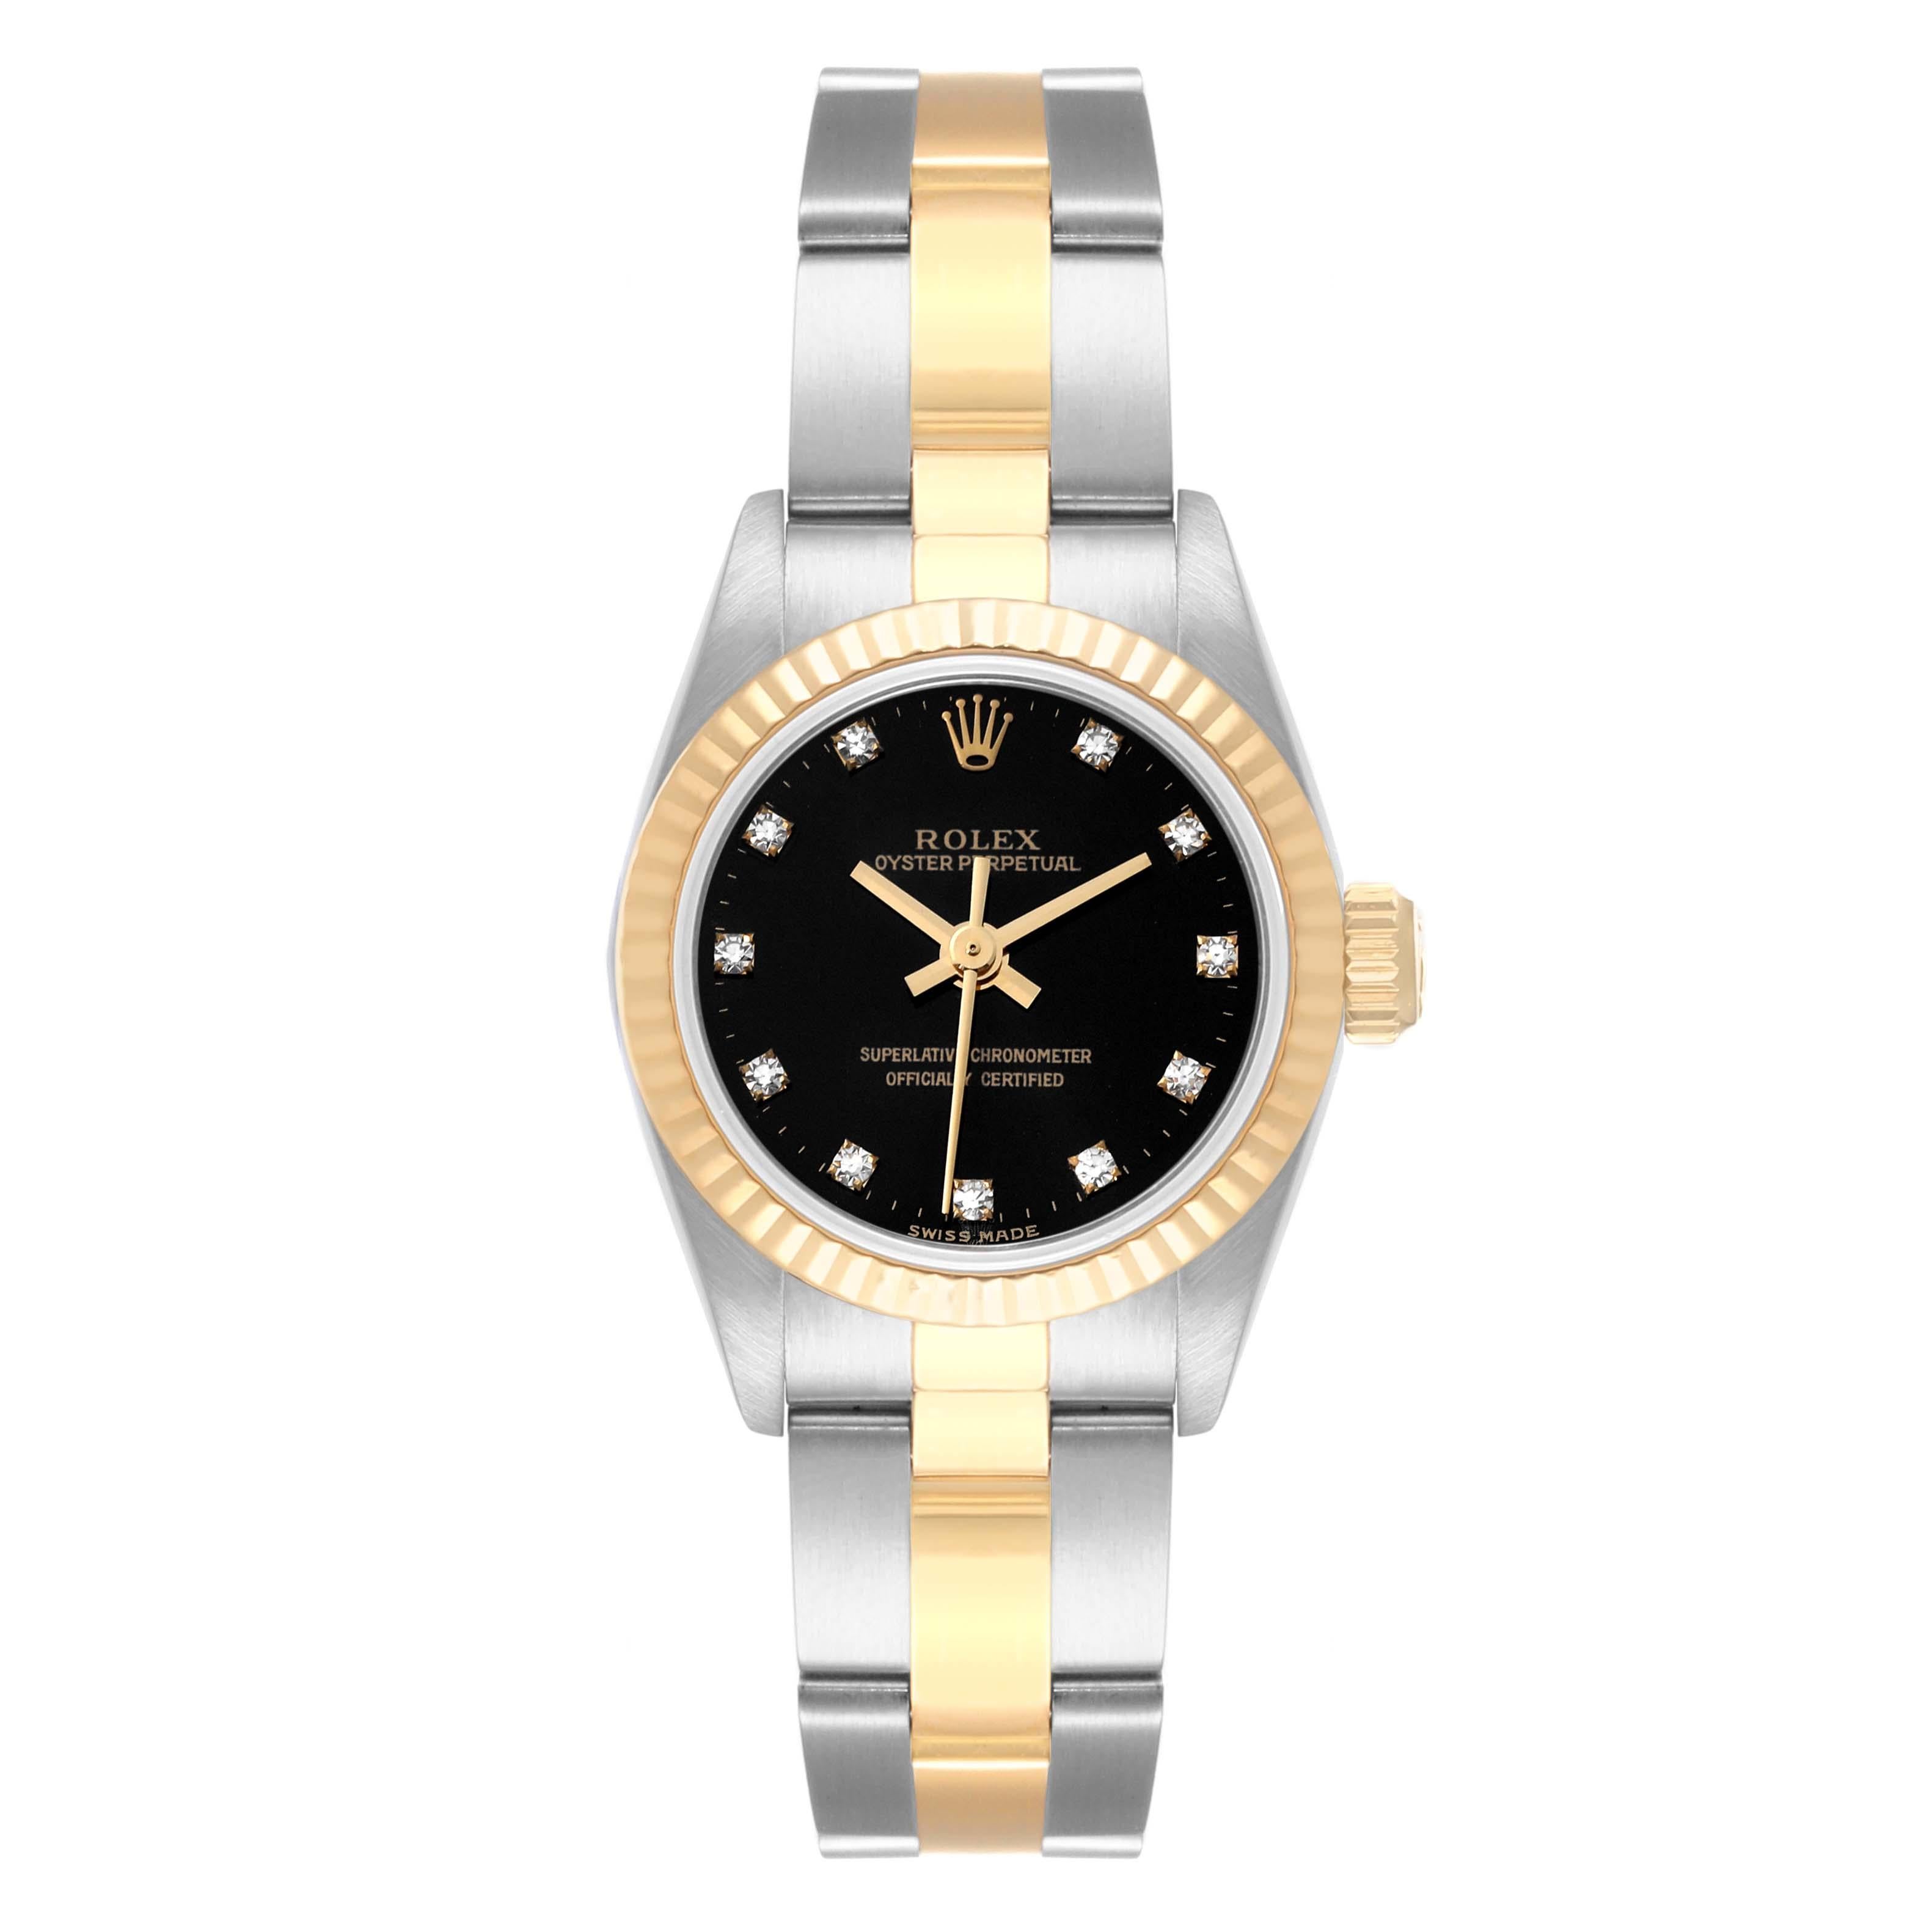 Rolex Oyster Perpetual Steel Yellow Gold Black Diamond Dial Ladies Watch 67193. Officially certified chronometer automatic self-winding movement. Stainless steel oyster case 24.0 mm in diameter. Rolex logo on an 18k yellow gold crown. 18k yellow